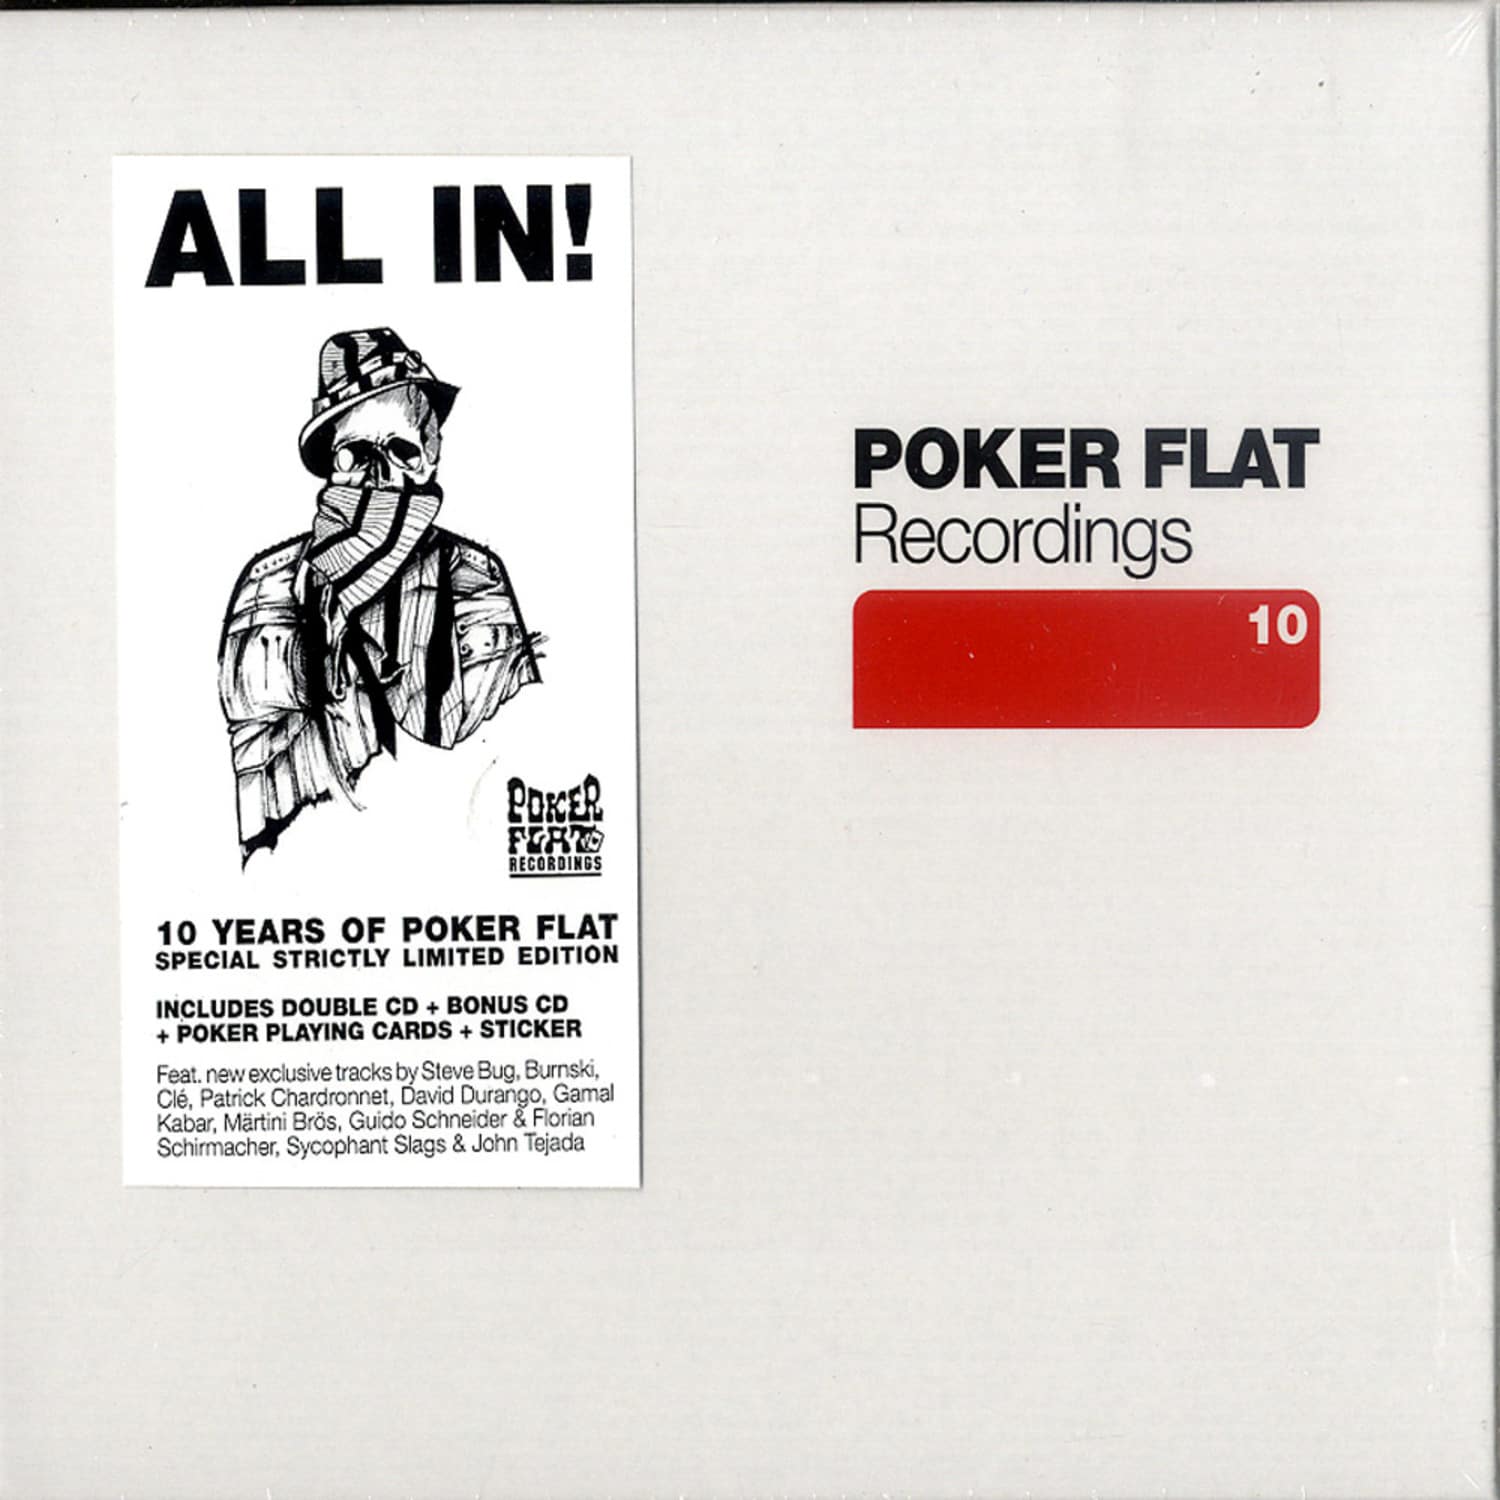 10 Years Poker Flat - ALL IN - THE 3 CD ALBUM LIM.ED. 